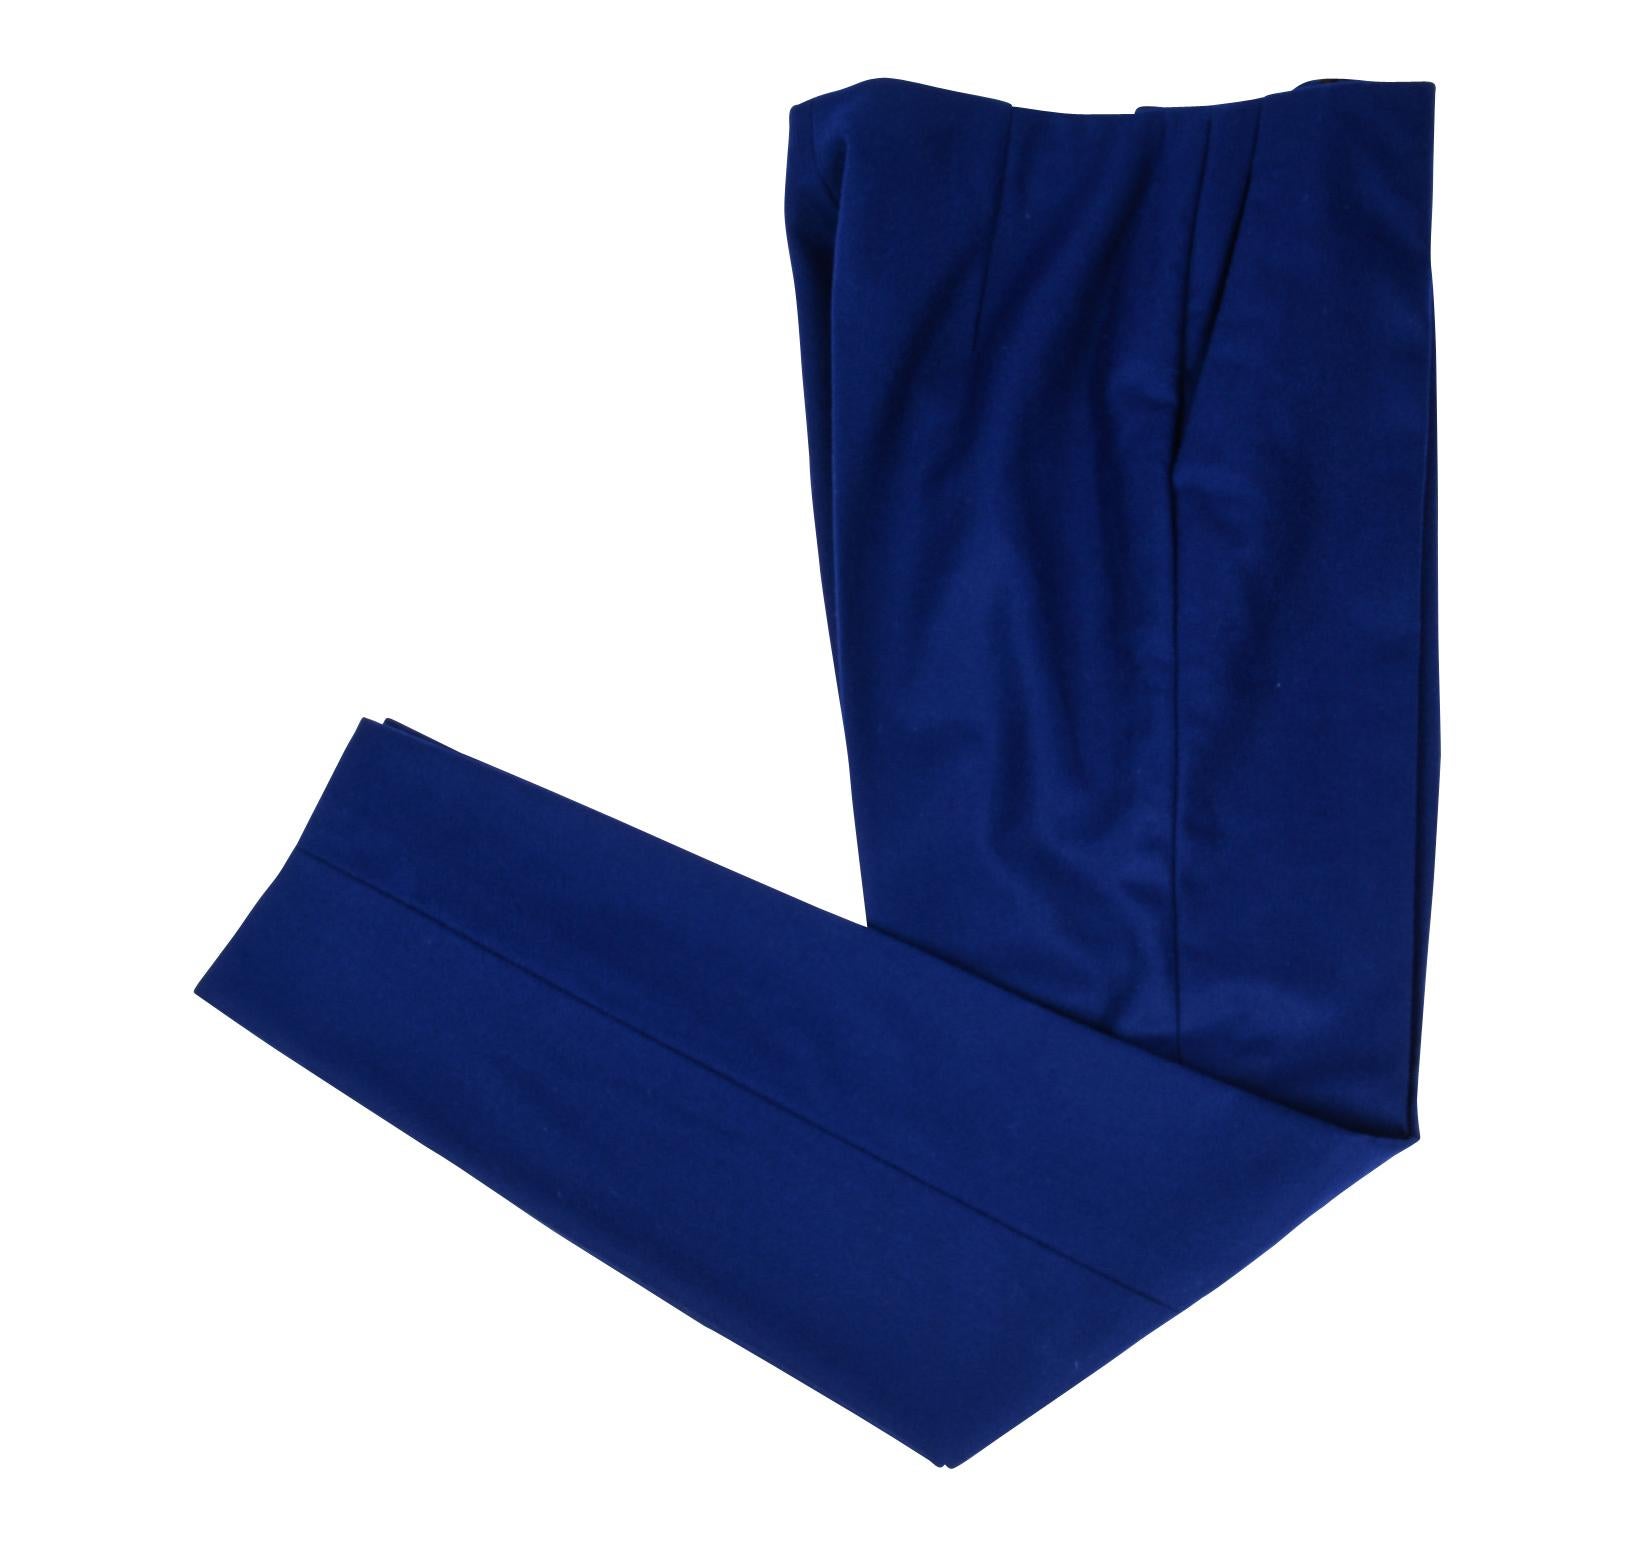 Guaranteed authentic Christian Dior electric blue pant in the soft flannel.   


Flat front pant with angled slash pockets.
Front zip with embossed pull.  
Pant has tapered leg. 
Perfect with heels, flats and boots. 
No fabric or size tag.  
final